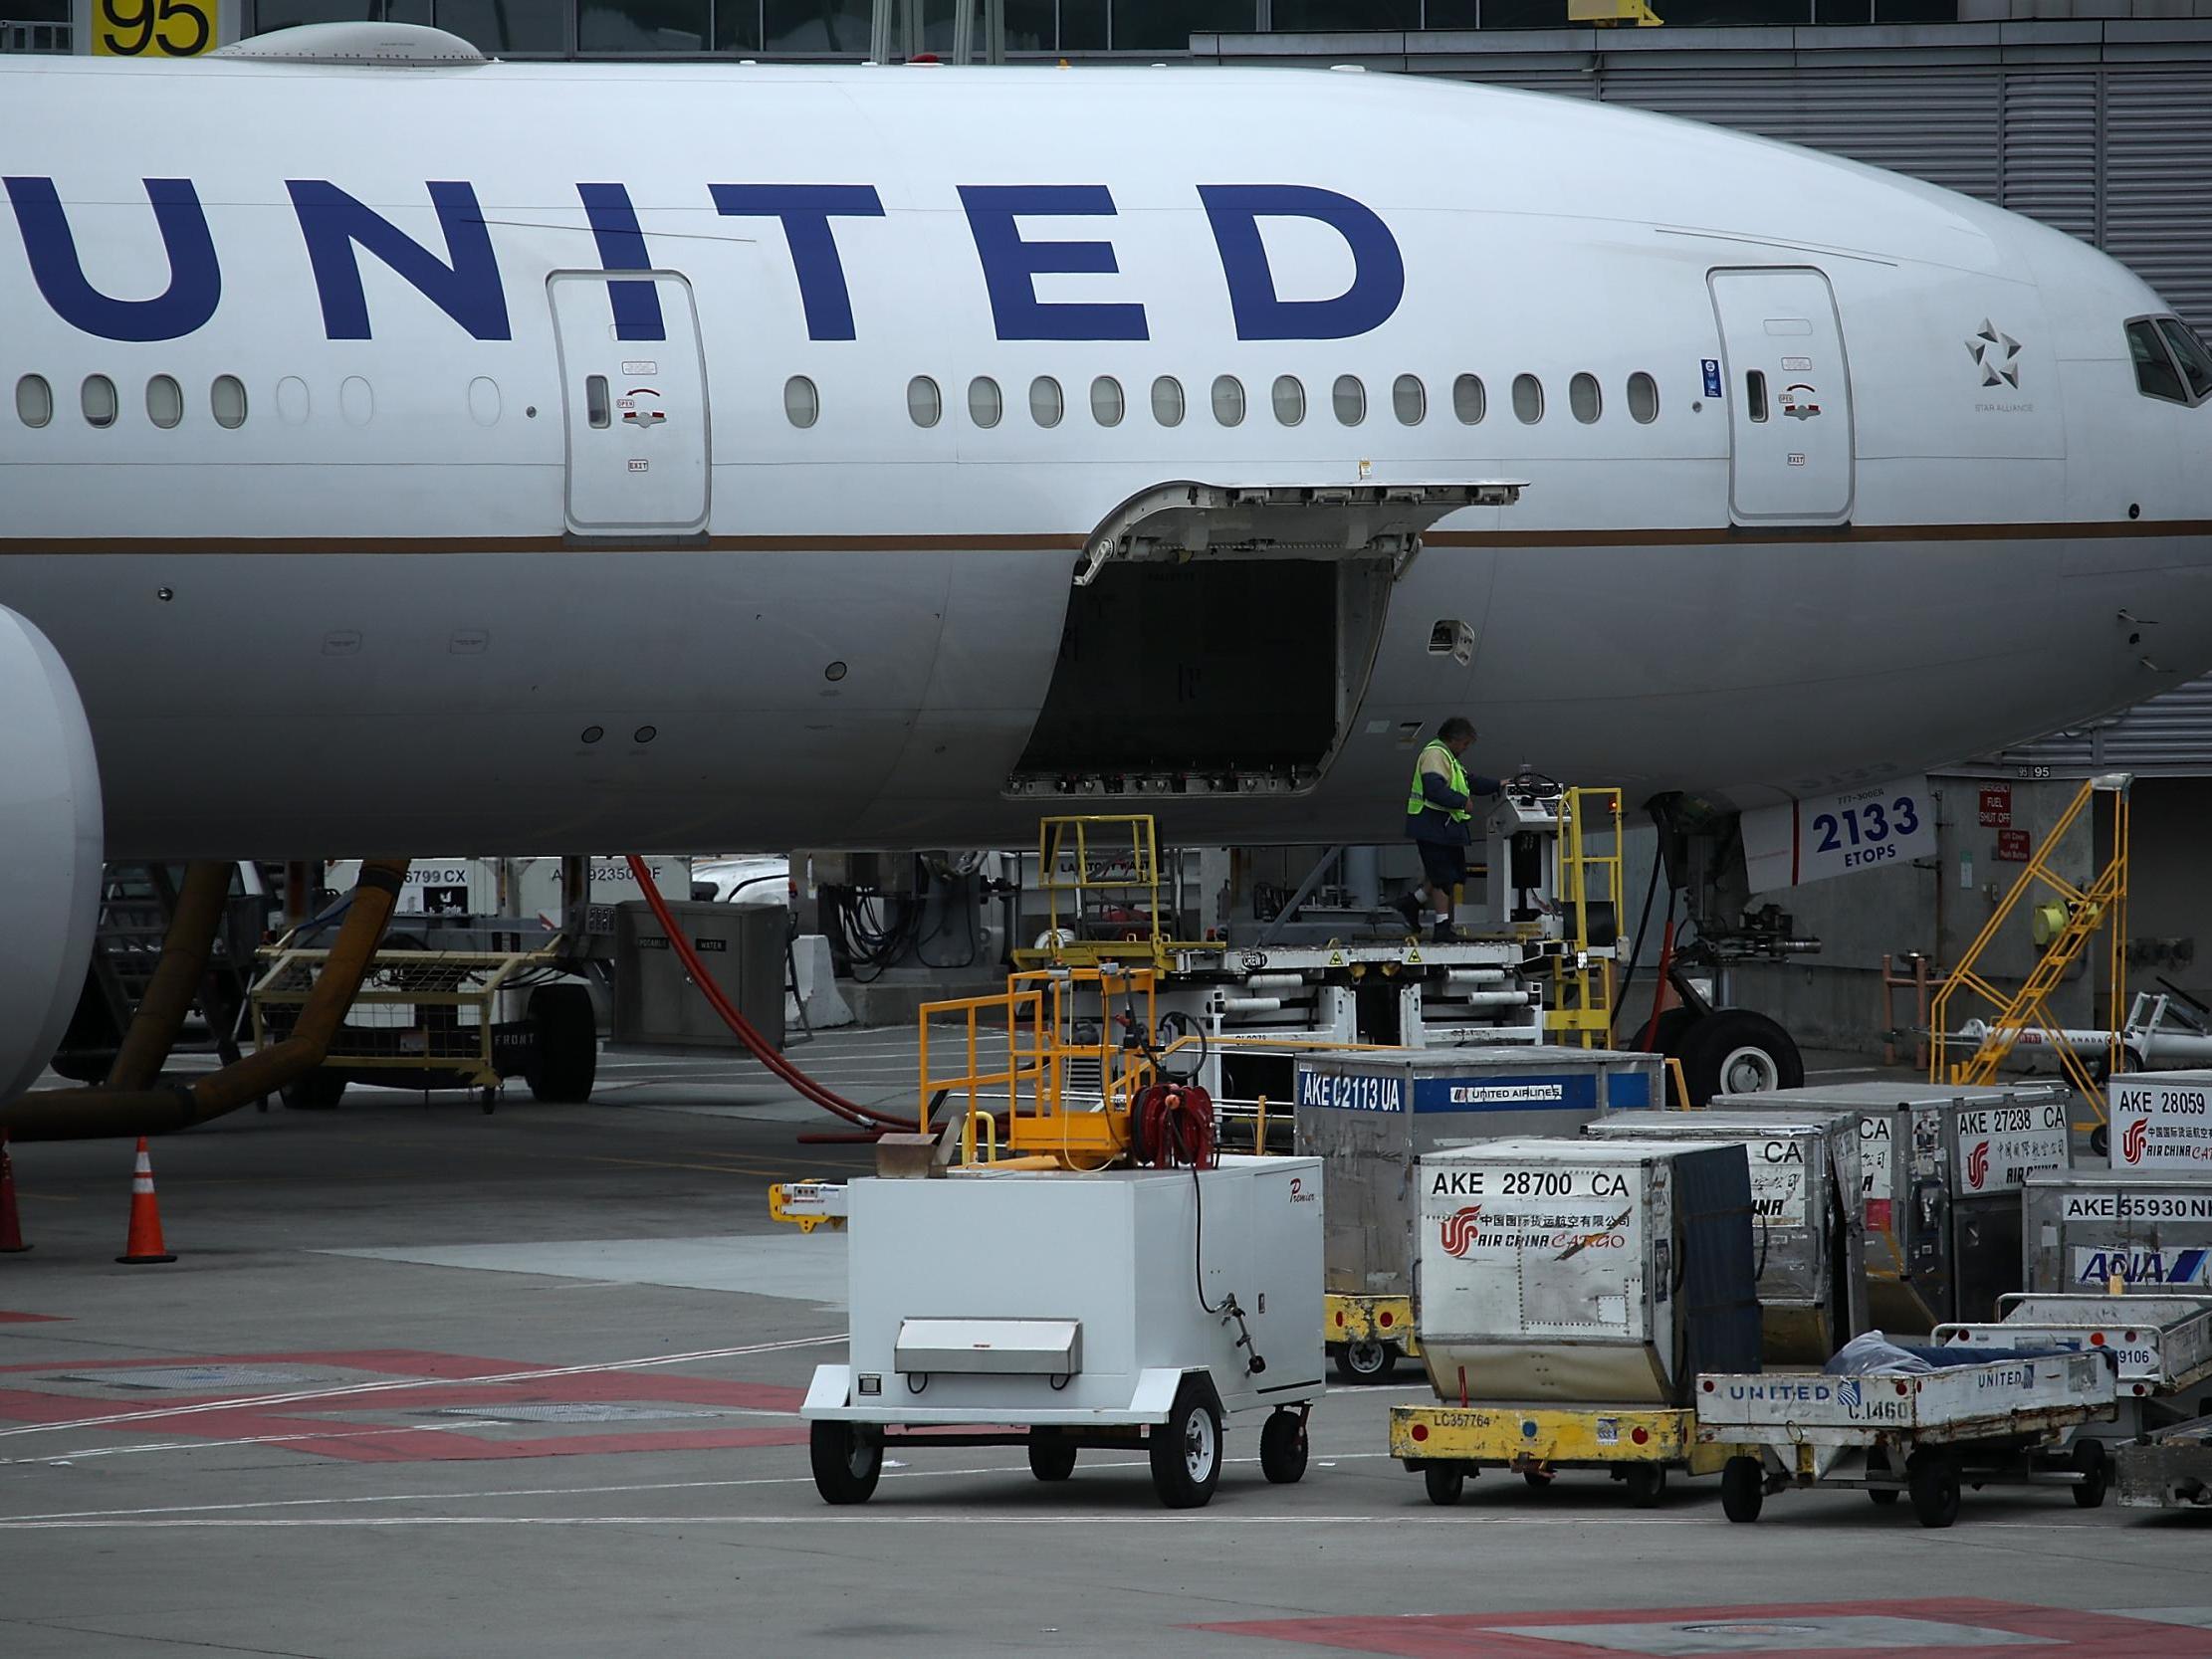 A contractor was killed while loading baggage onto a United Airlines flight